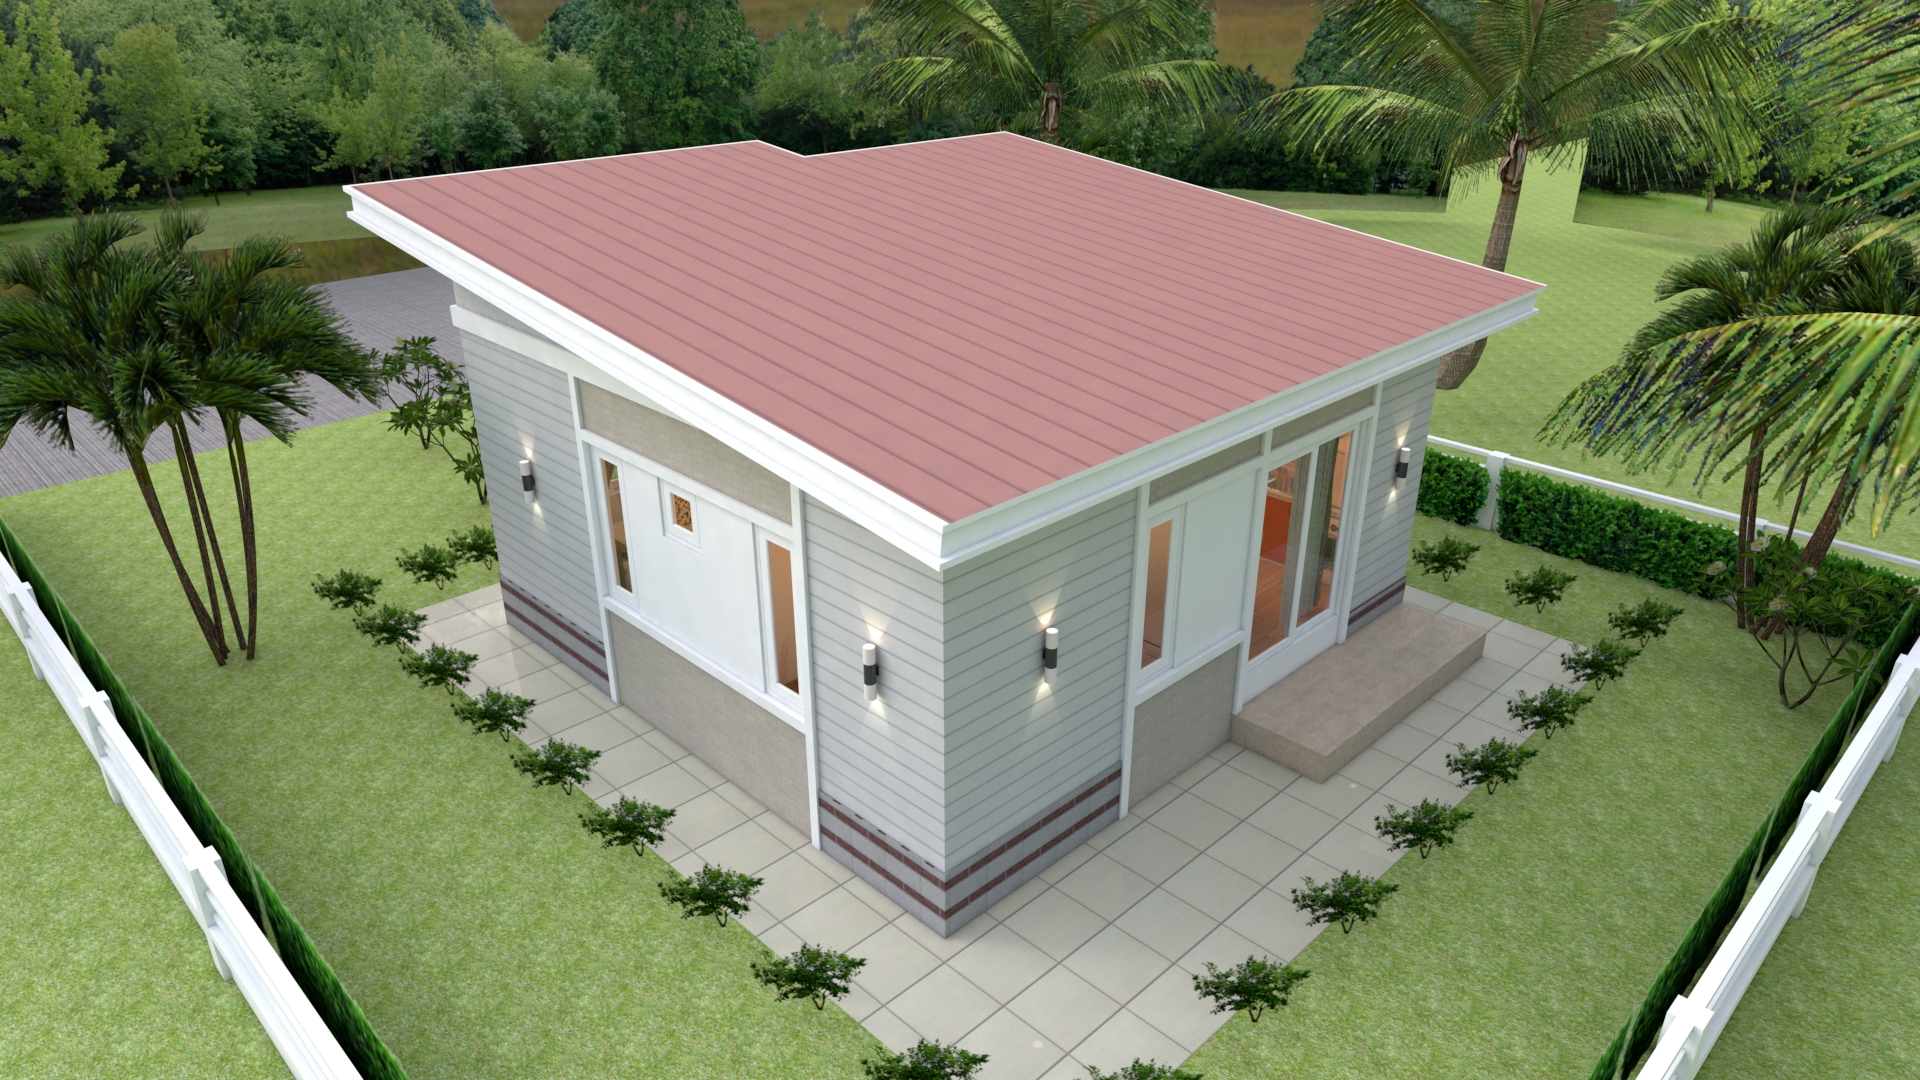 House Design 3d 7x7 Meter 23x23 Feet 2 bedrooms Shed Roof